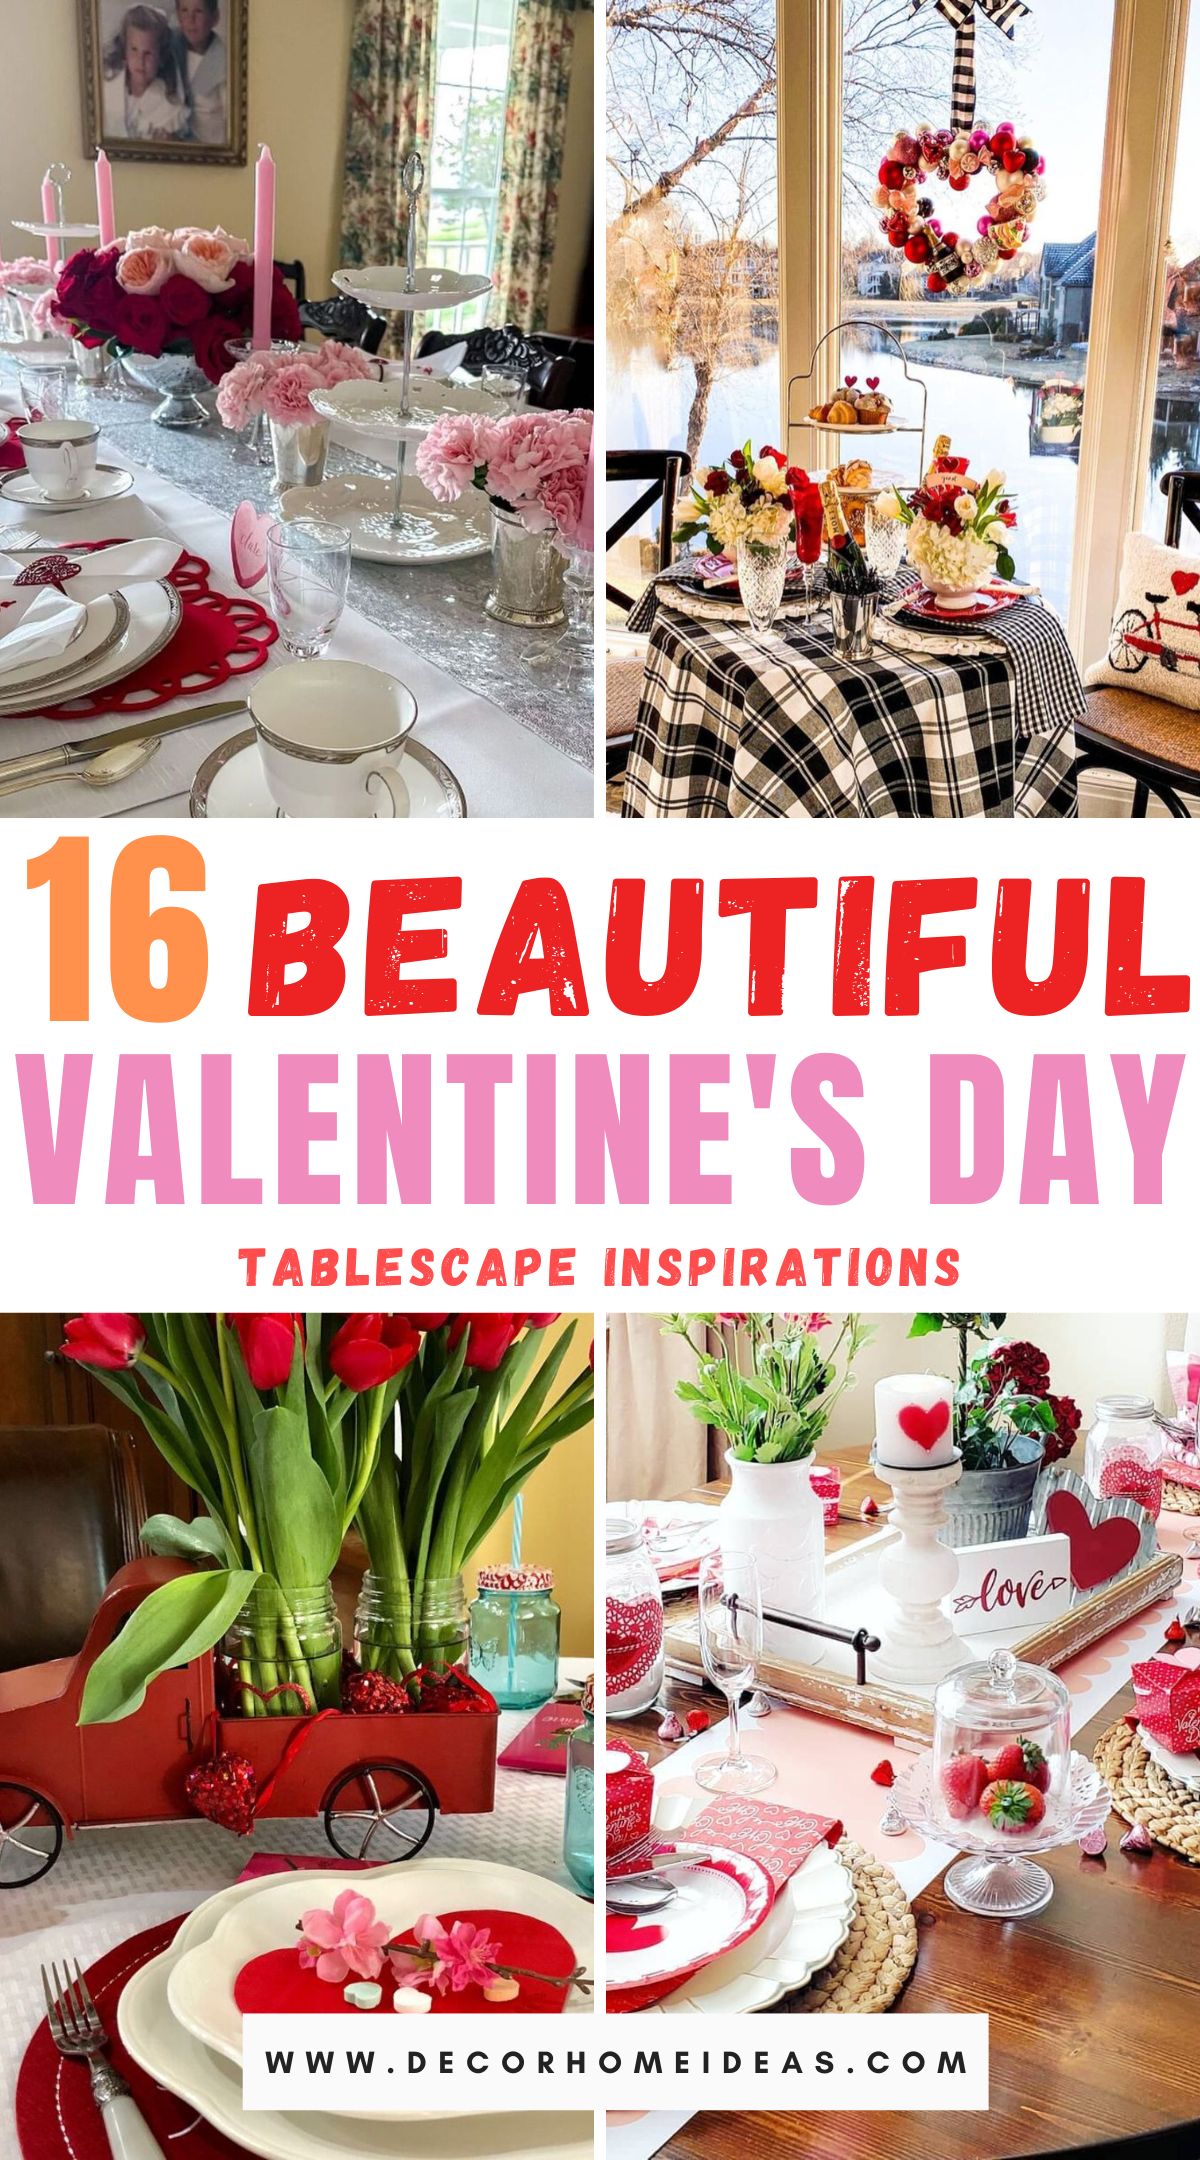 Ignite the romance this Valentine's Day with our selection of 16 captivating tablescape ideas. Explore creative and romantic inspirations to set the perfect ambiance for a memorable and intimate dining experience.